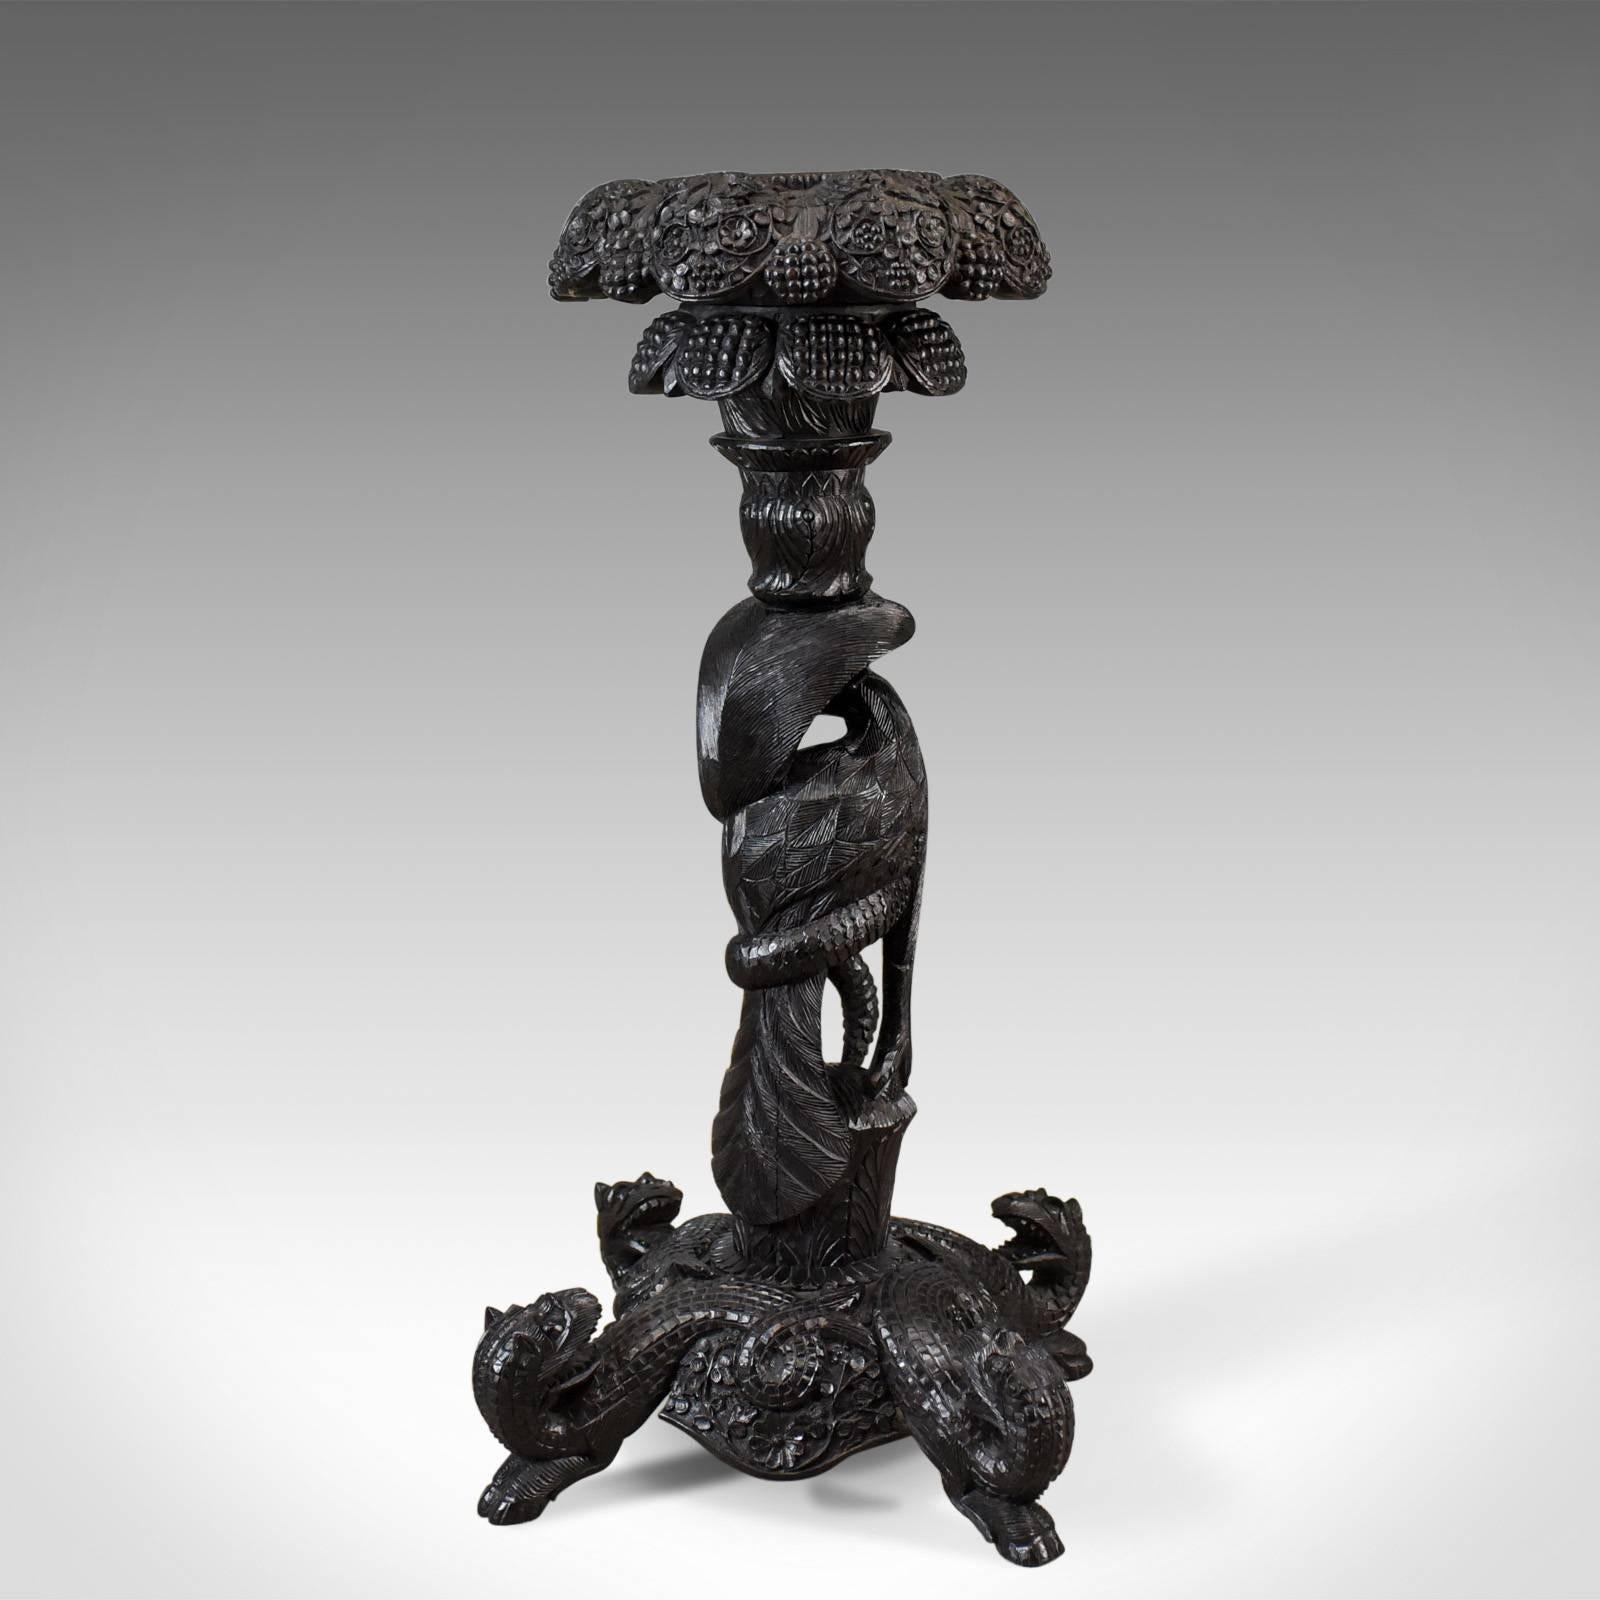 This is an antique jardiniere plant stand, a carved Asian torchere dating to the late 19th century, circa 1880.

A profusely carved stand very well executed
Teak with an appropriate ebonised finish
Generous, deep dished bowl receptacle